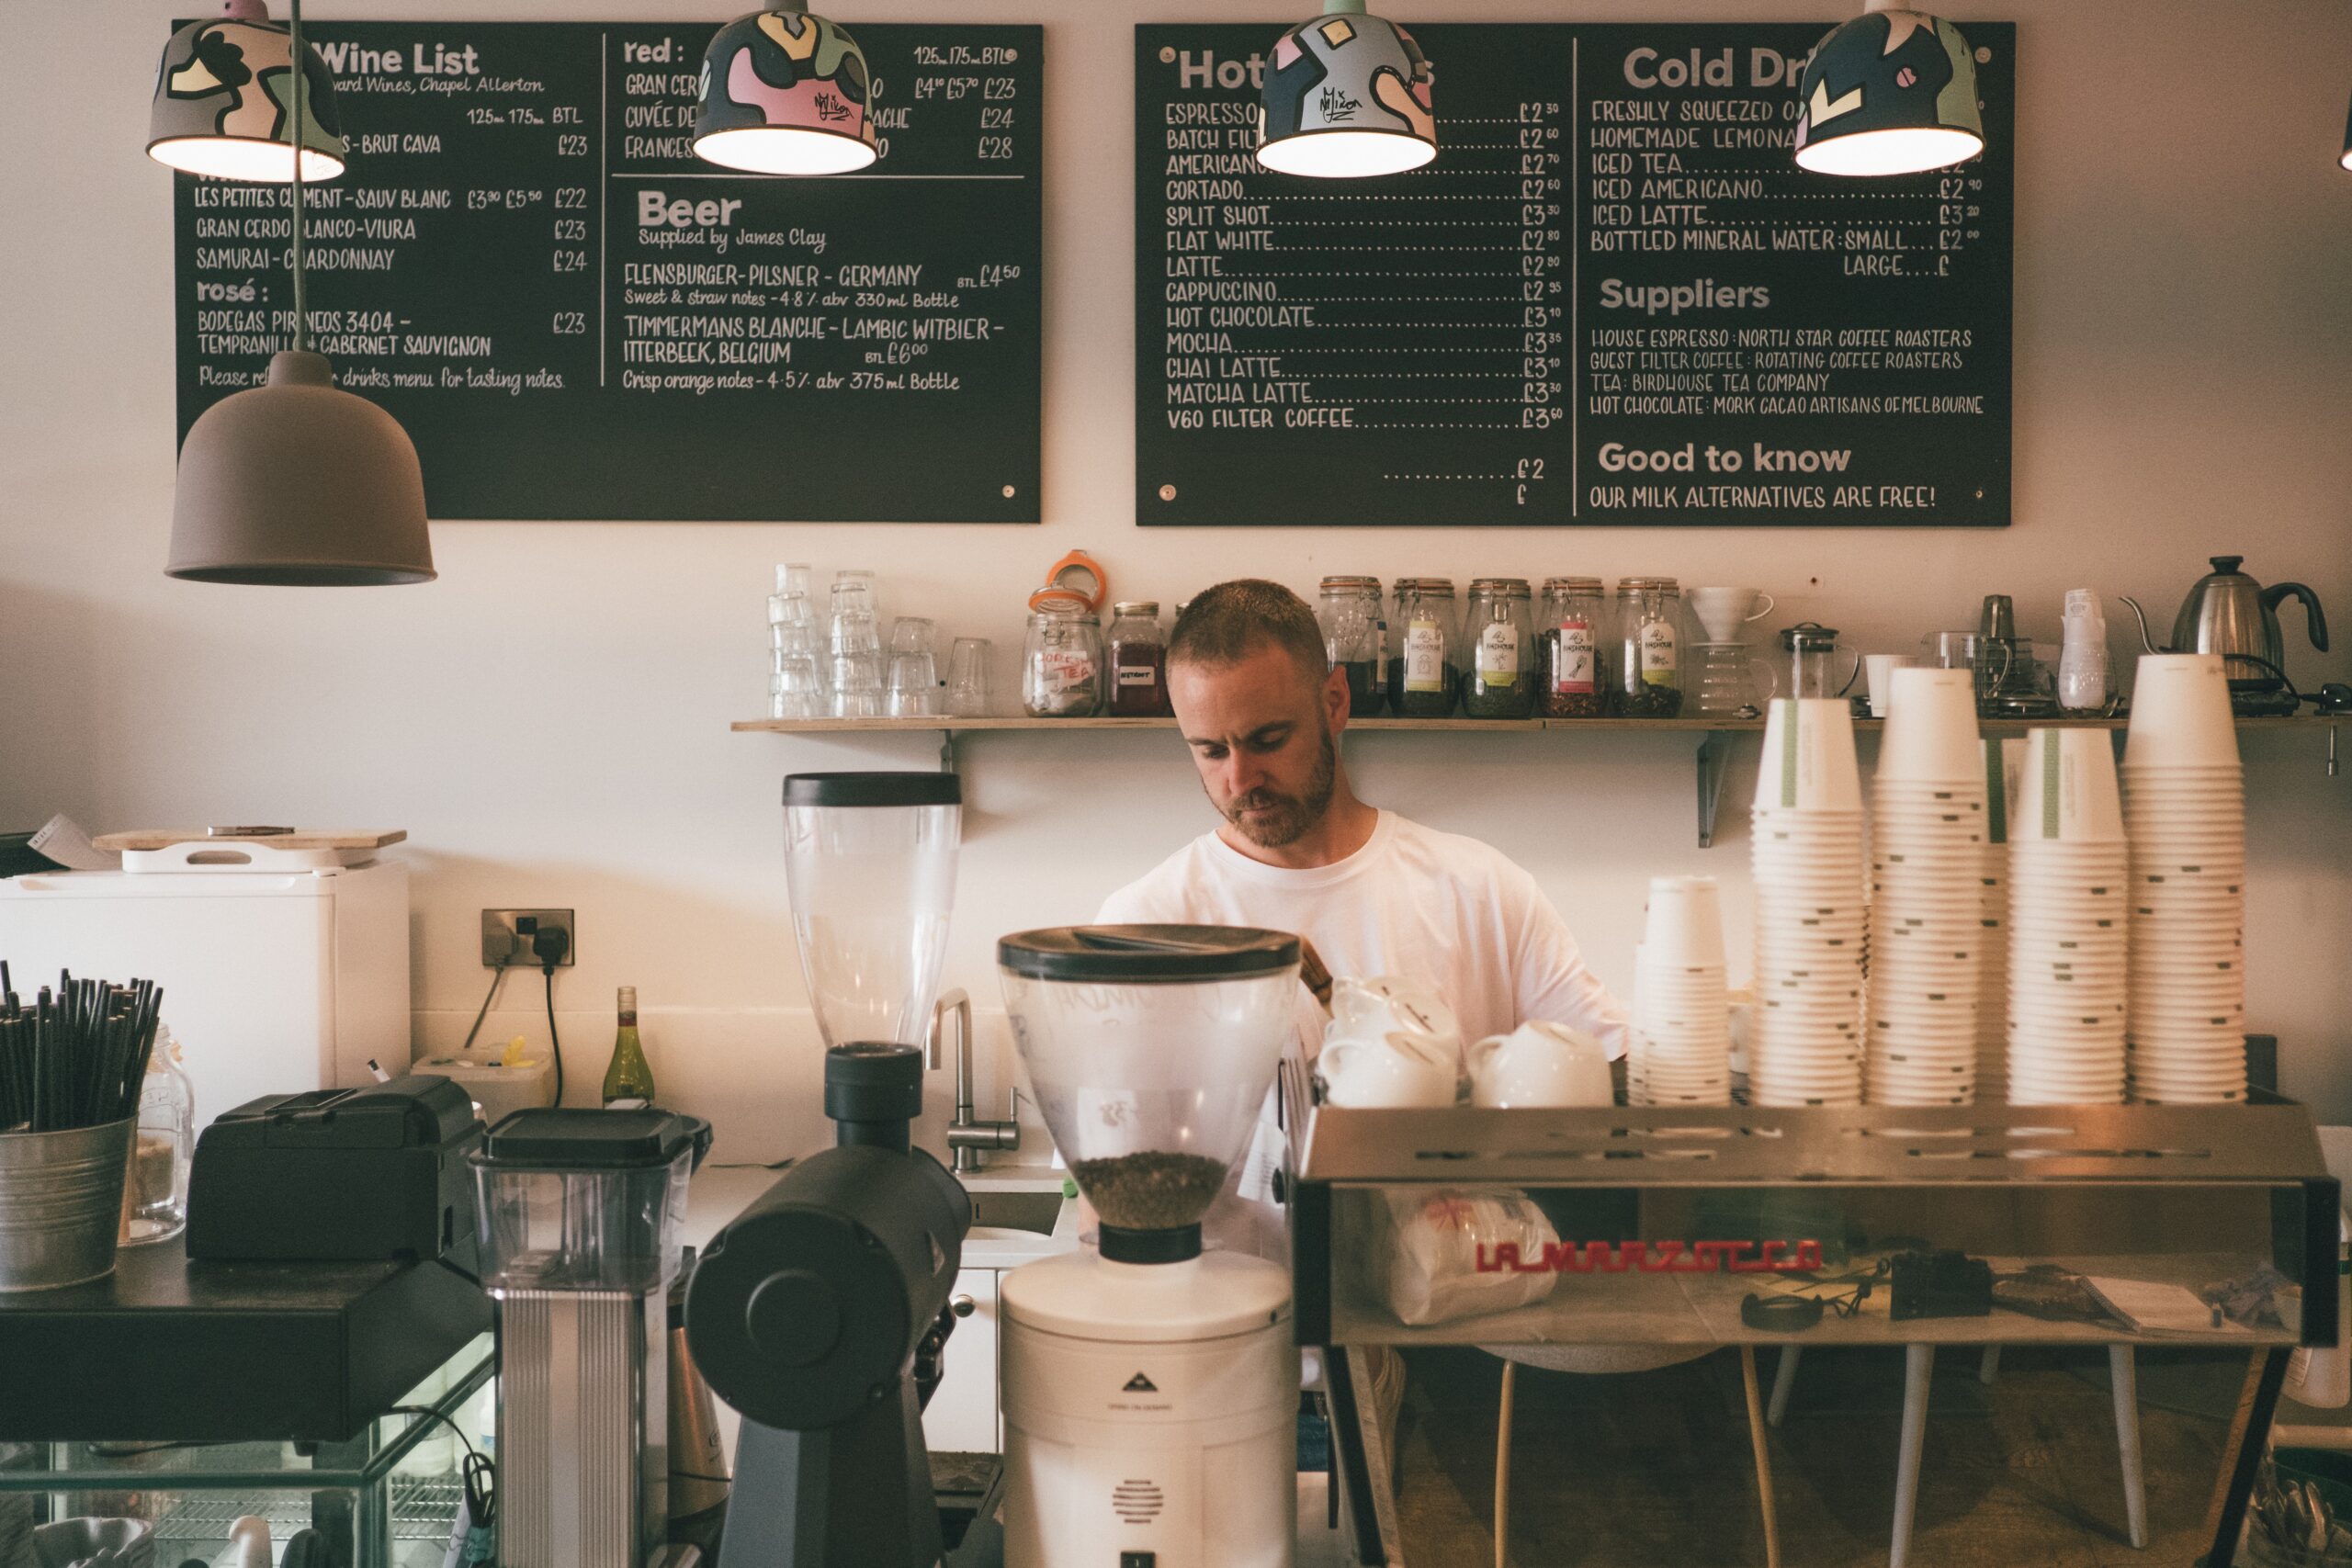 Man Working At A Coffee Shop - Small Business News